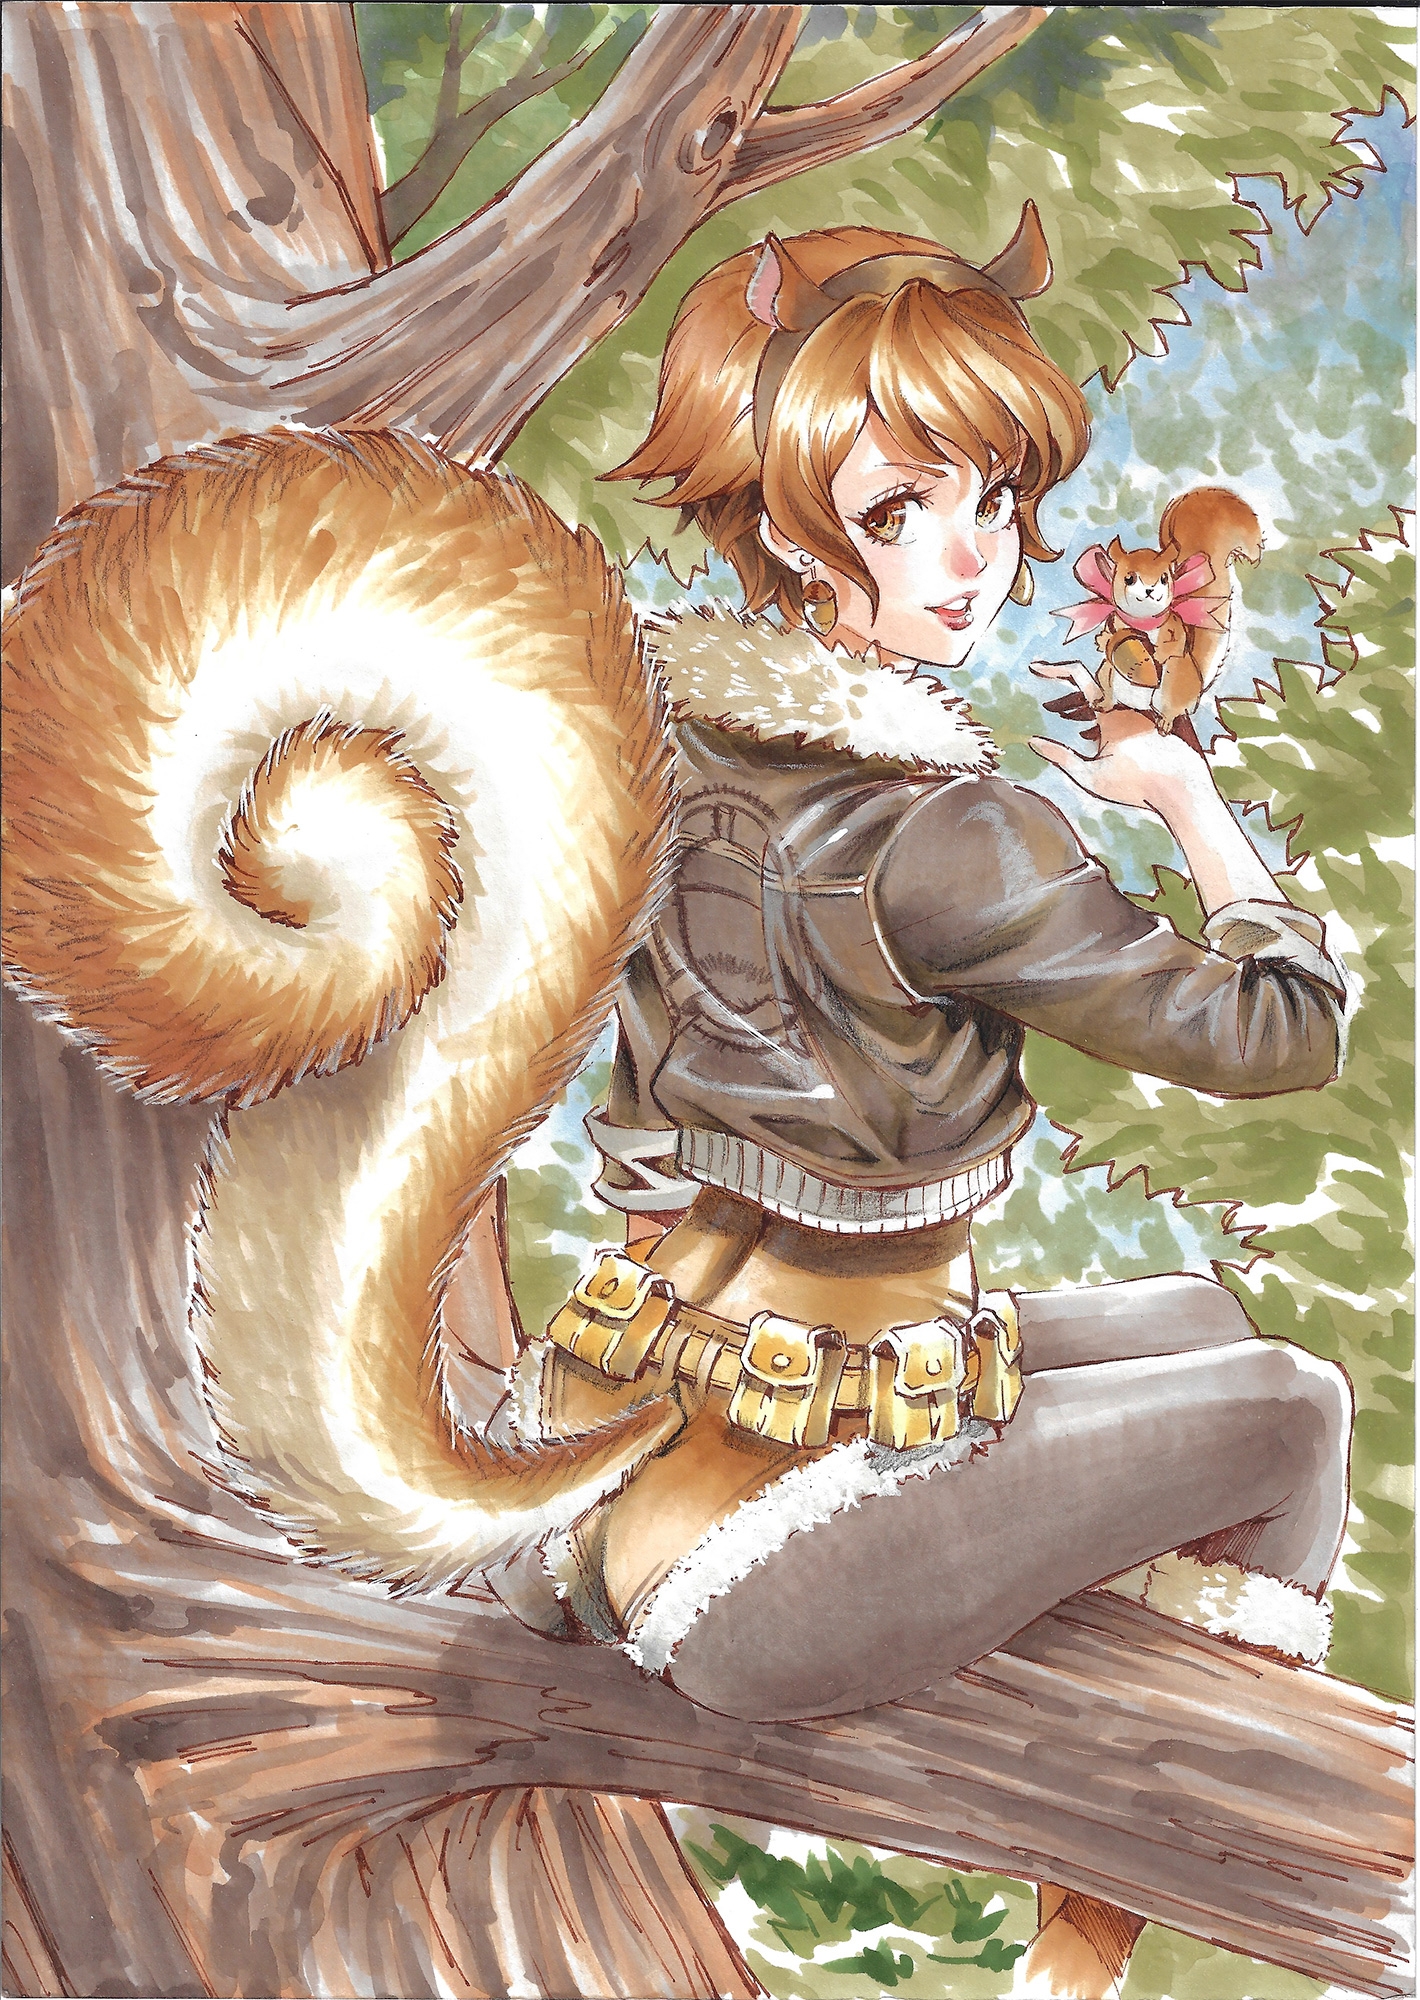 Bannertail: The Adventures of Gray Squirrel (Anime) - TV Tropes